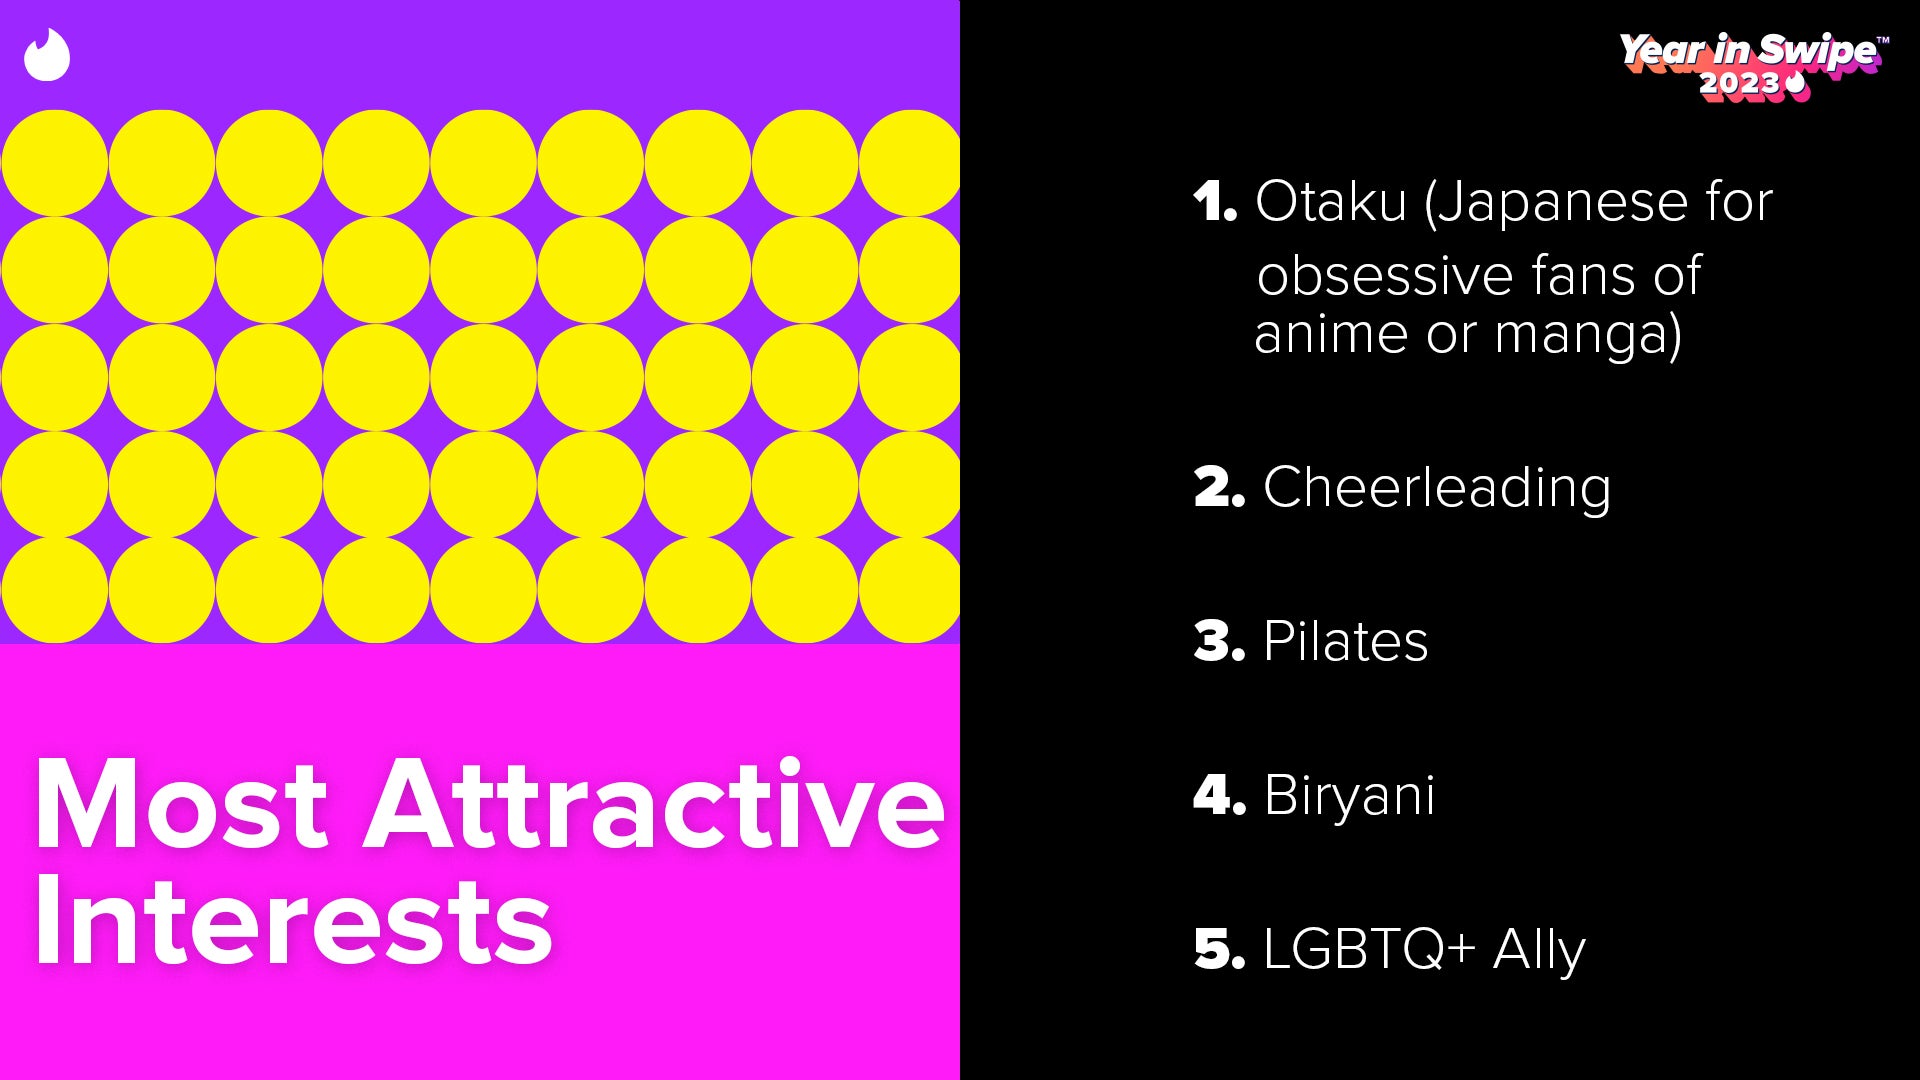 Otaku was the most attractive interest this year